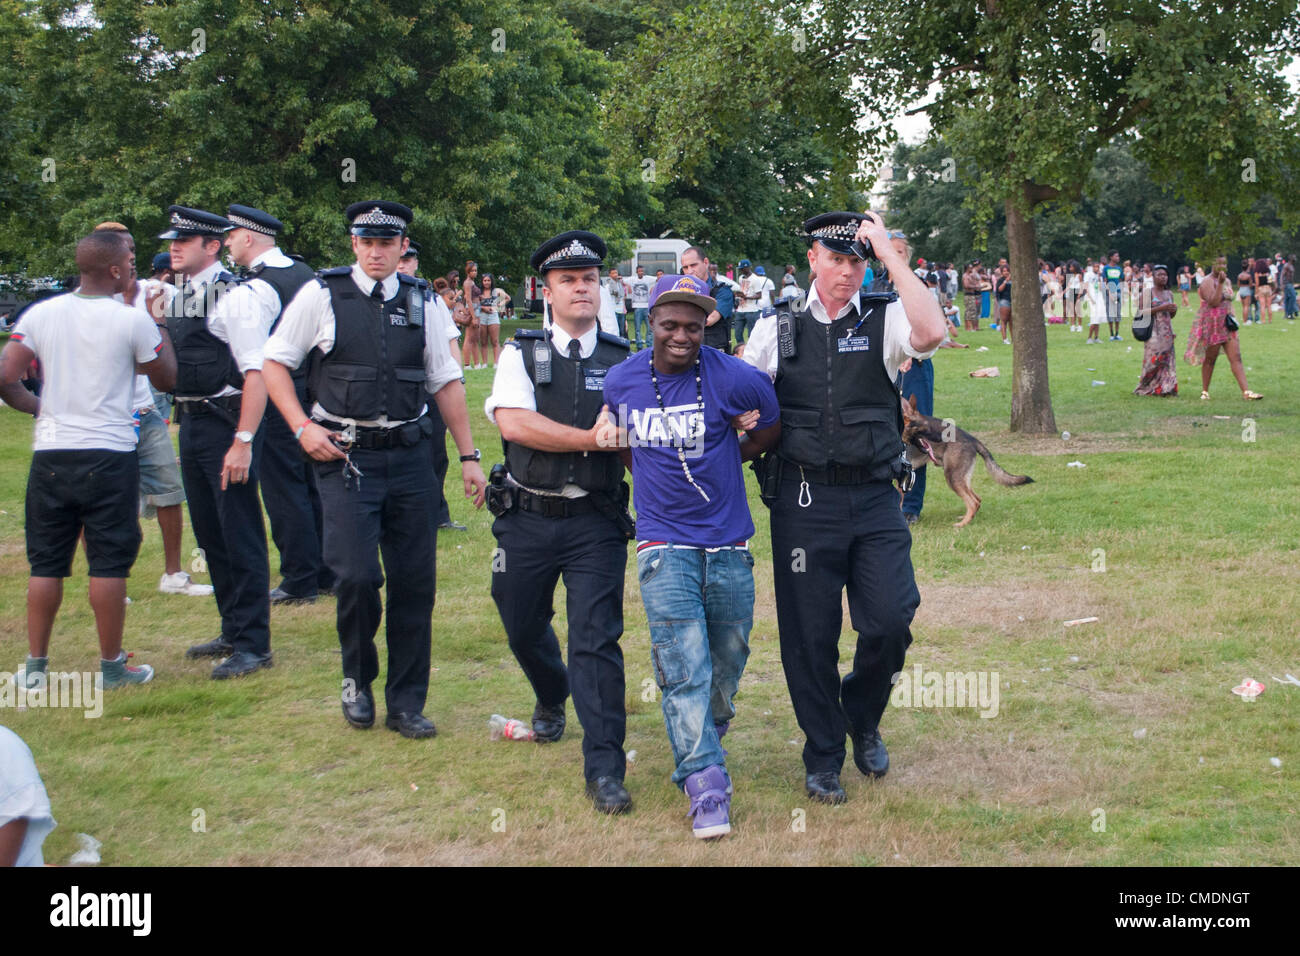 London, UK. 25/07/12. A youth is arrested for a breach of the peace due to  an argument with officers, after a second night of violence in Hyde Park.  Police officers, including officers